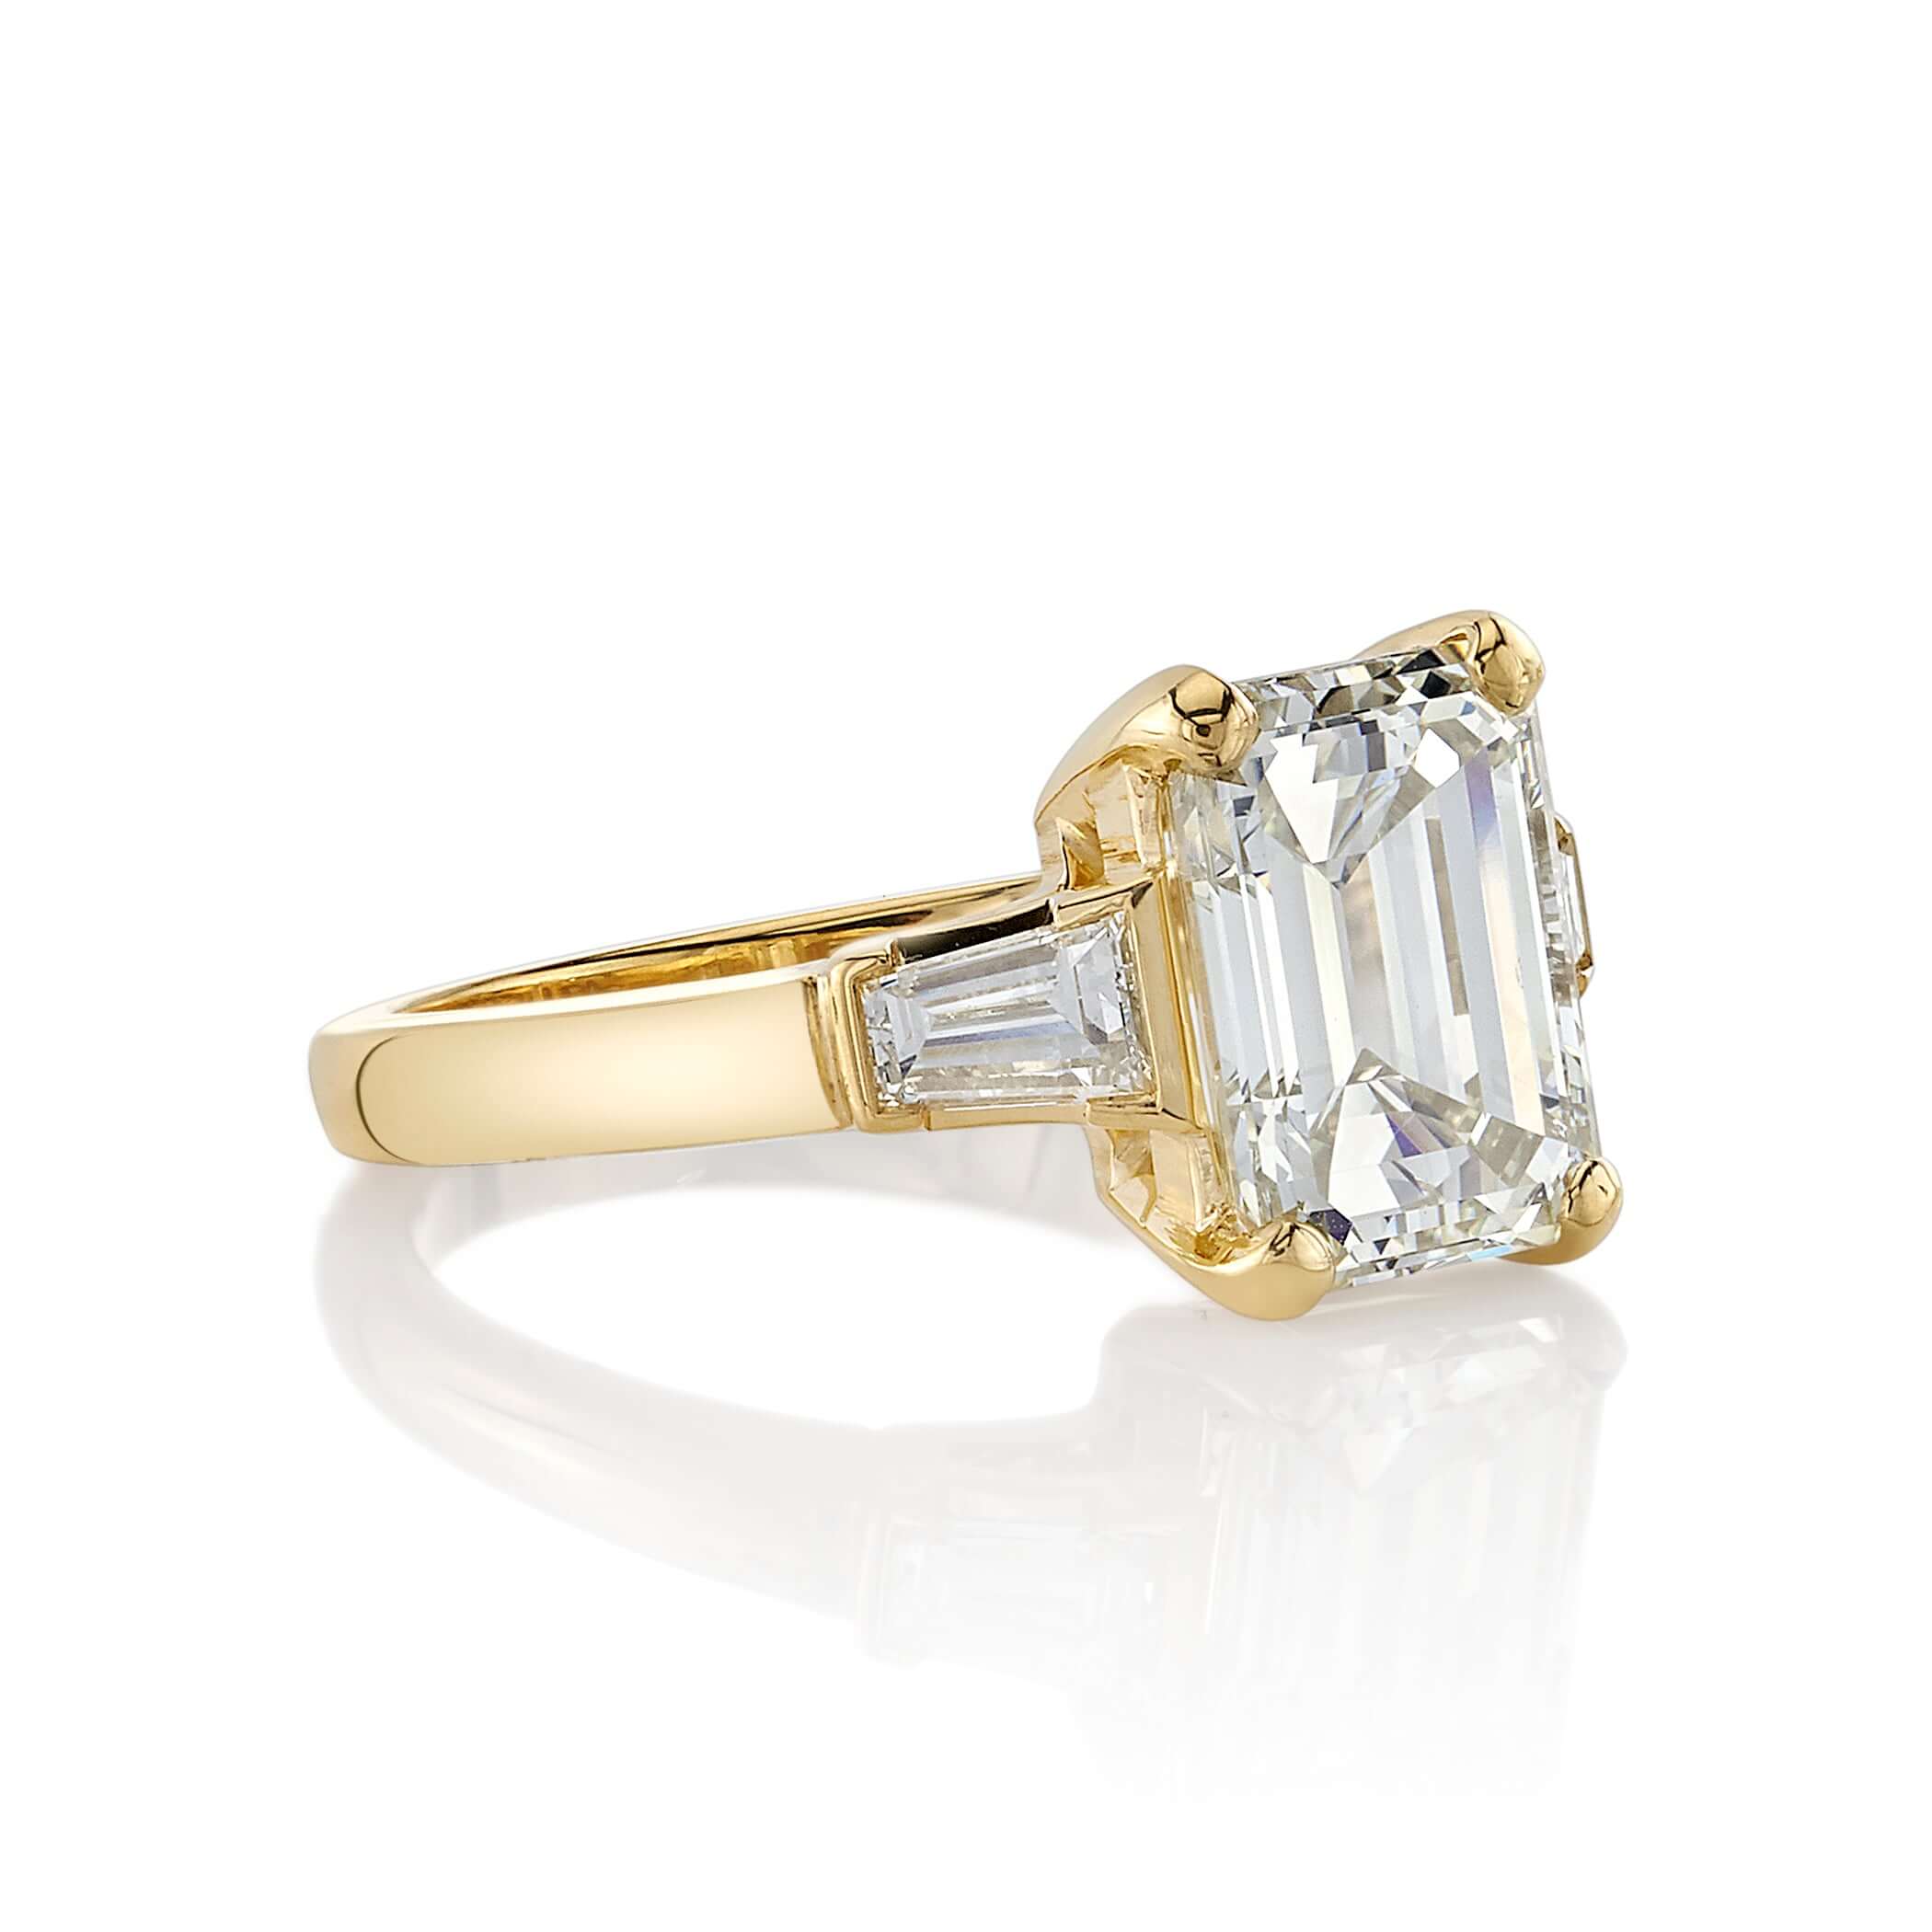 SINGLE STONE FAY RING featuring 3.30ct S-T/VVS2 GIA certified emerald cut diamond with 0.55ctw baguette cut accent diamonds prong set in a handcrafted 18K yellow gold setting.